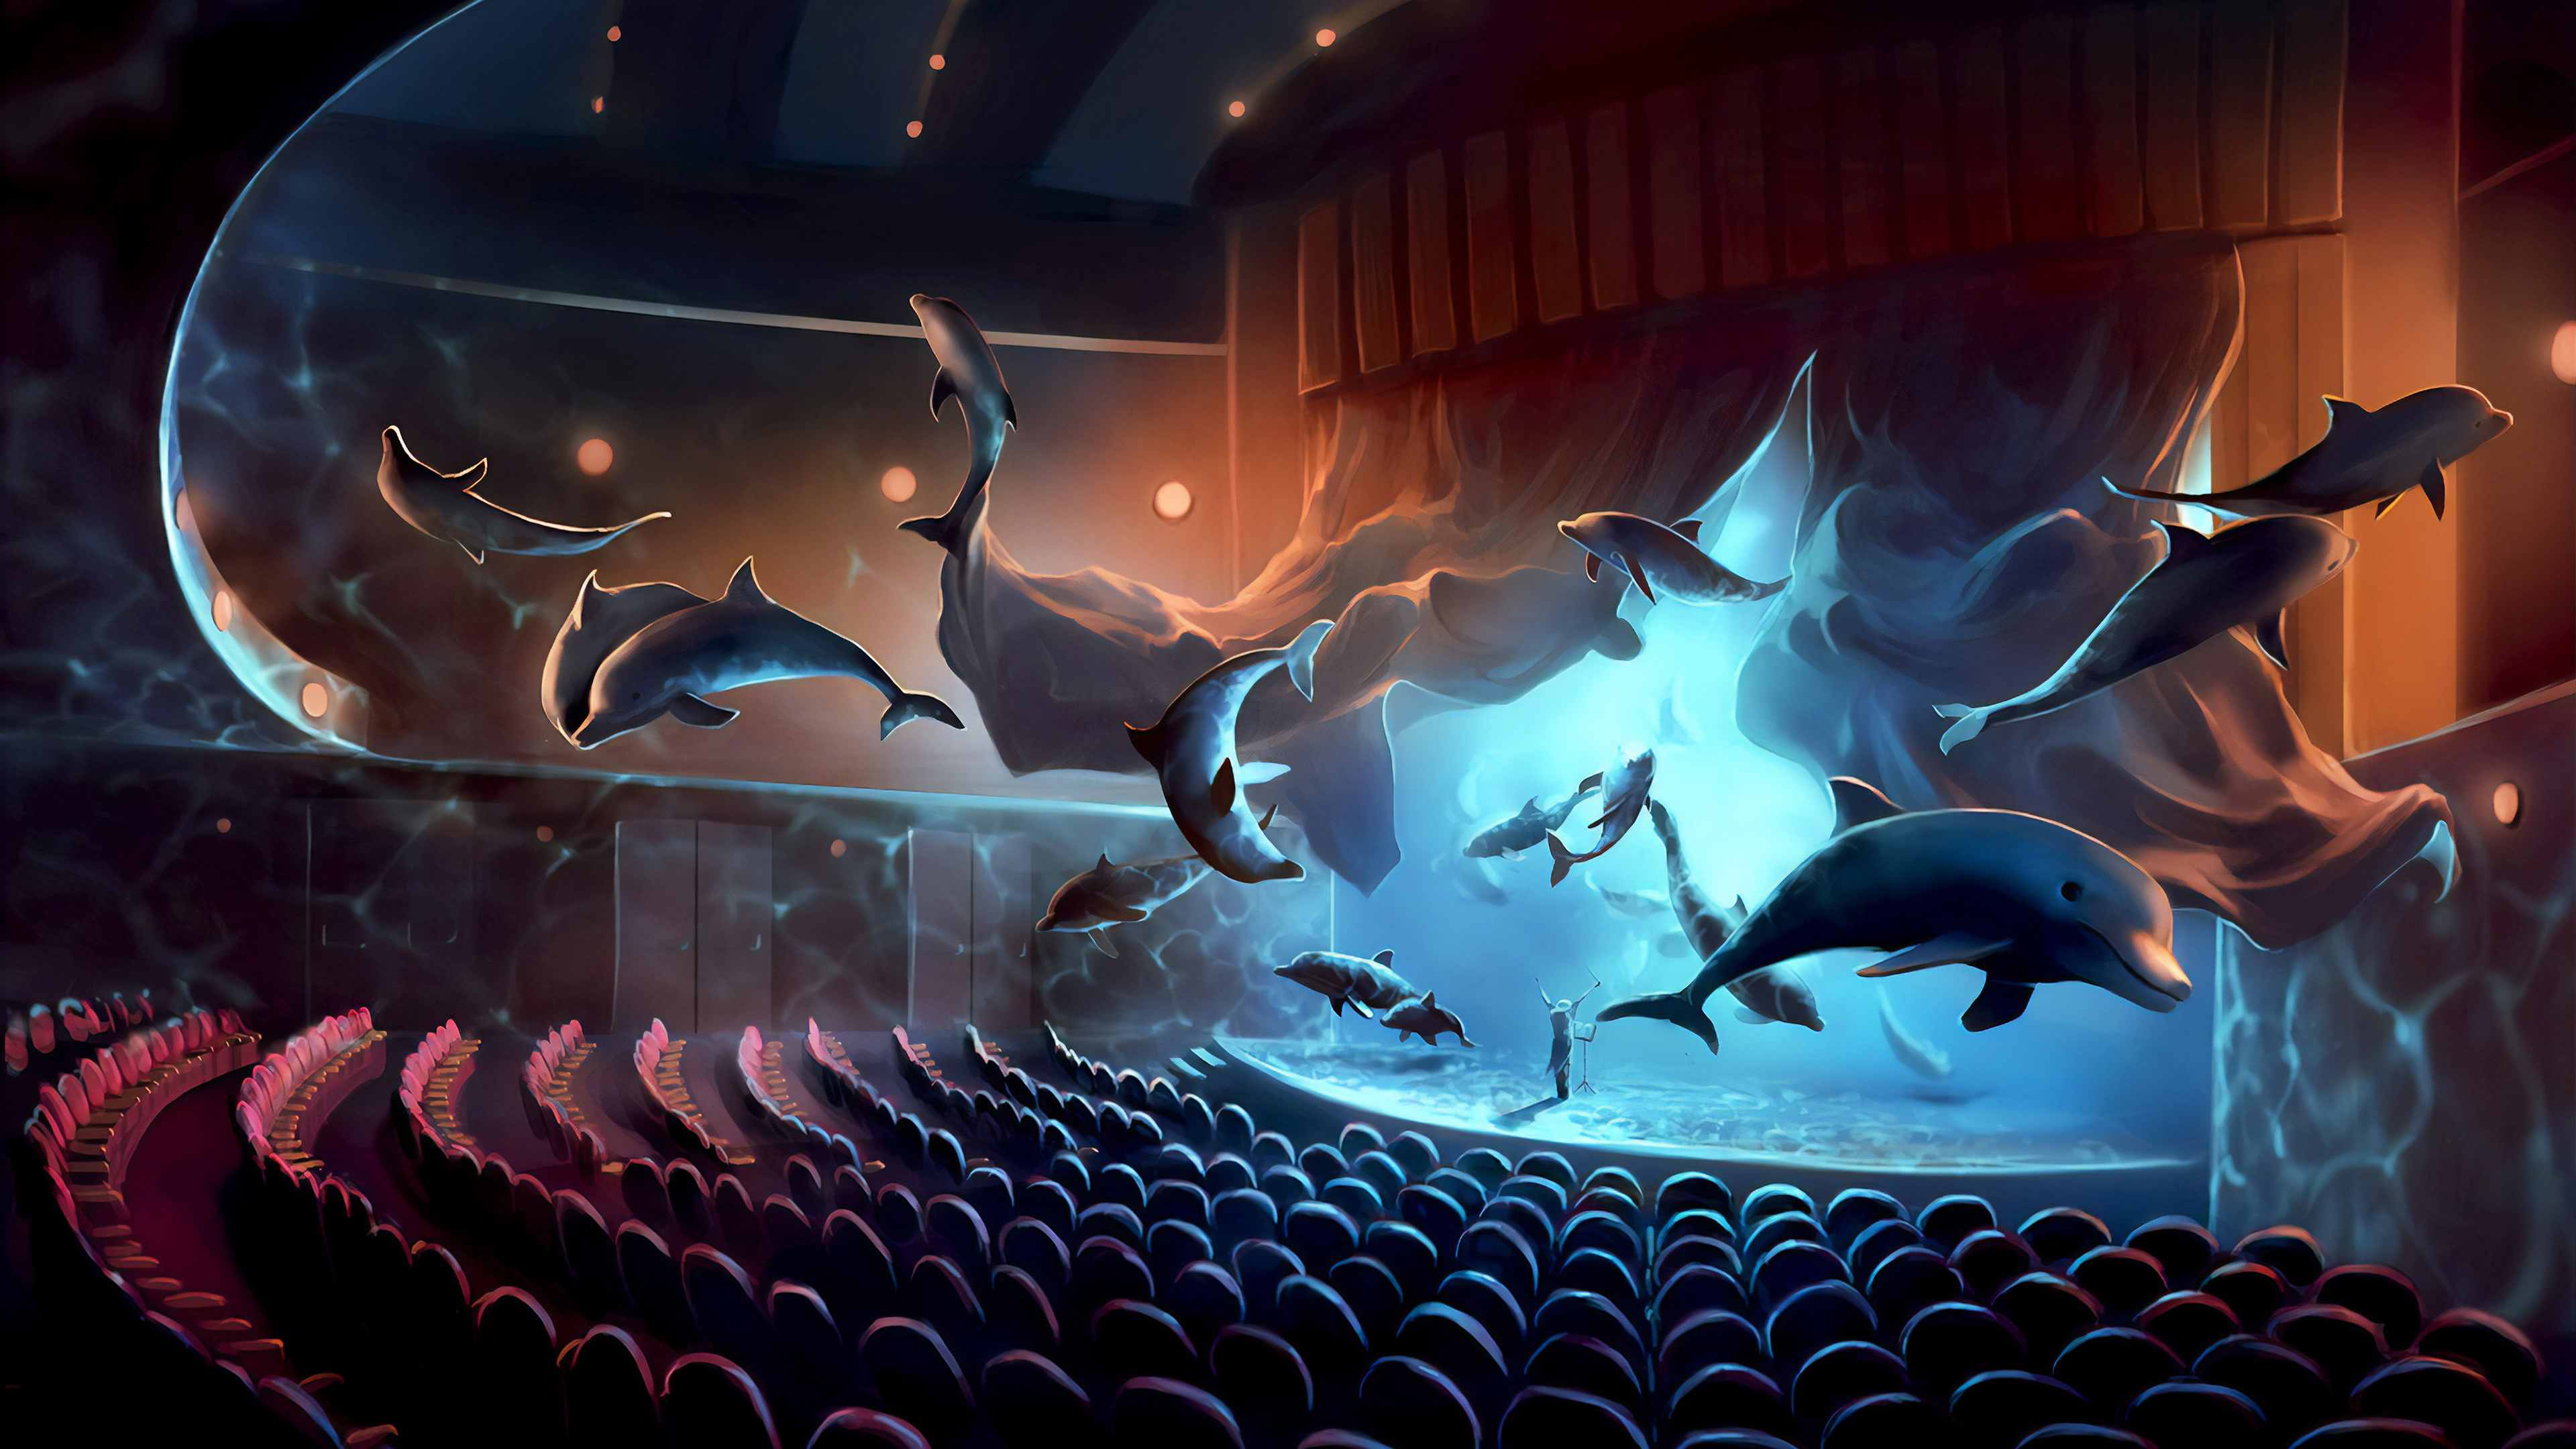 General 3840x2160 digital art artwork fantasy art drawing painting digital painting landscape theaters lights animals dolphin colorful stages stage light surreal chair red chair floating concept art environment water atmosphere cyan AquaSixio